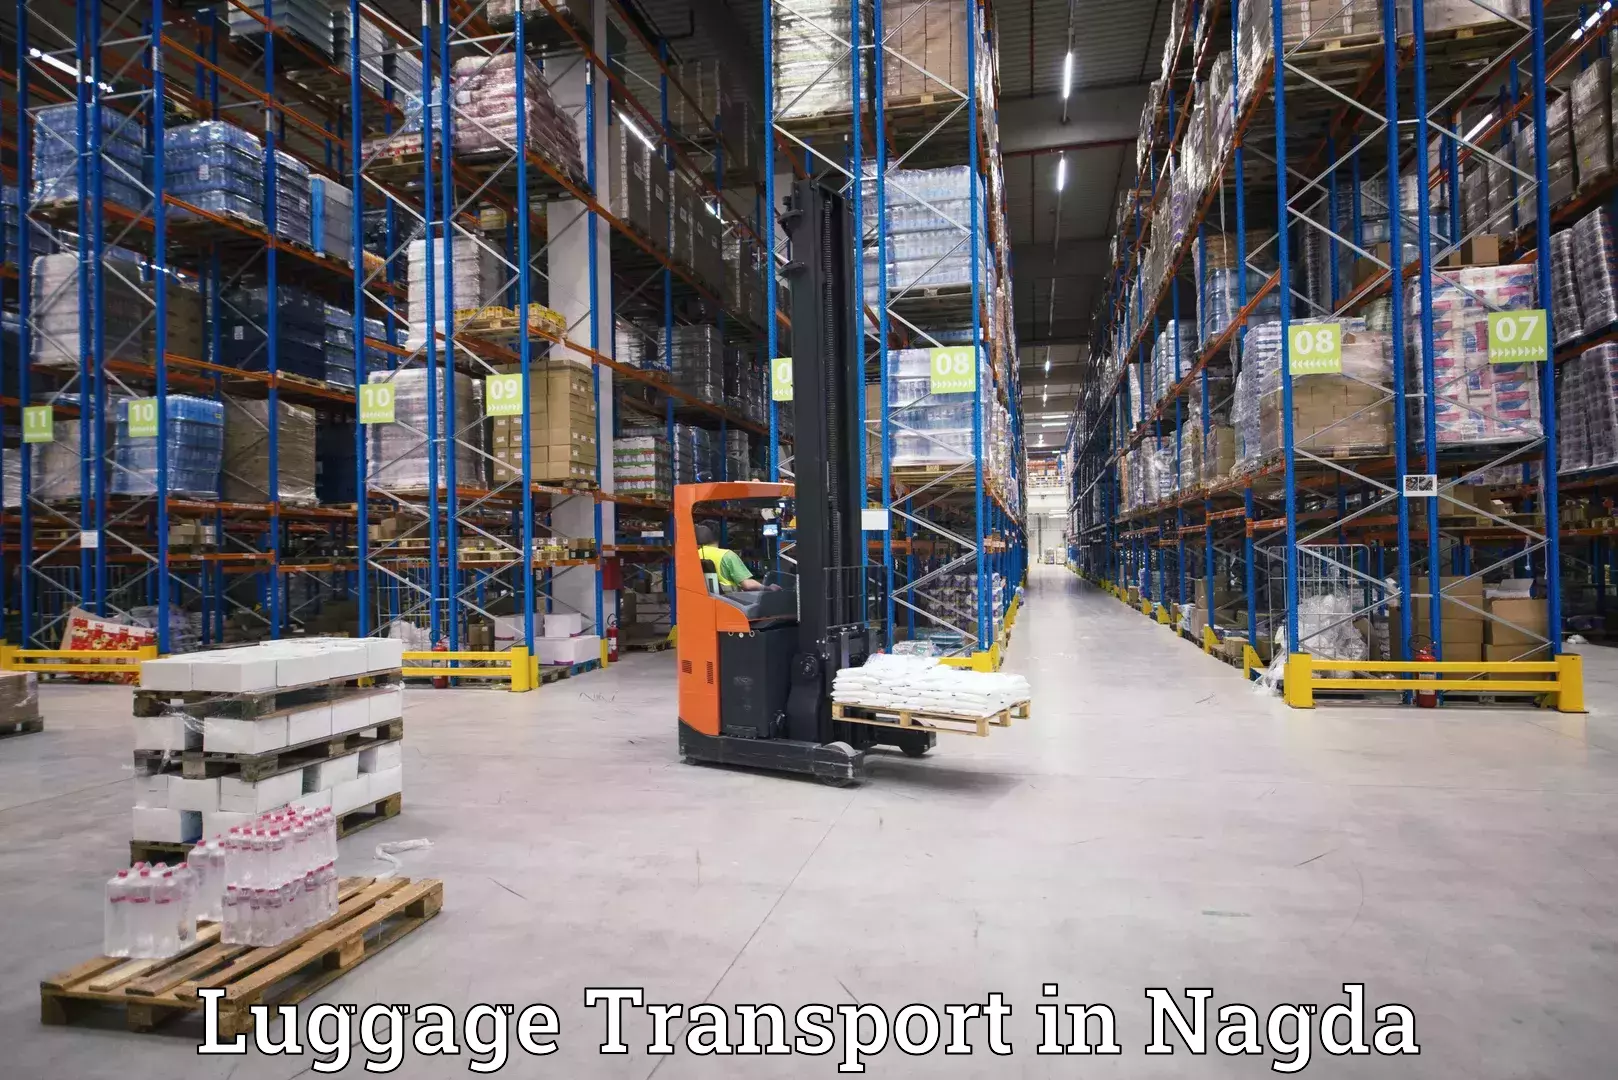 Luggage transport solutions in Nagda